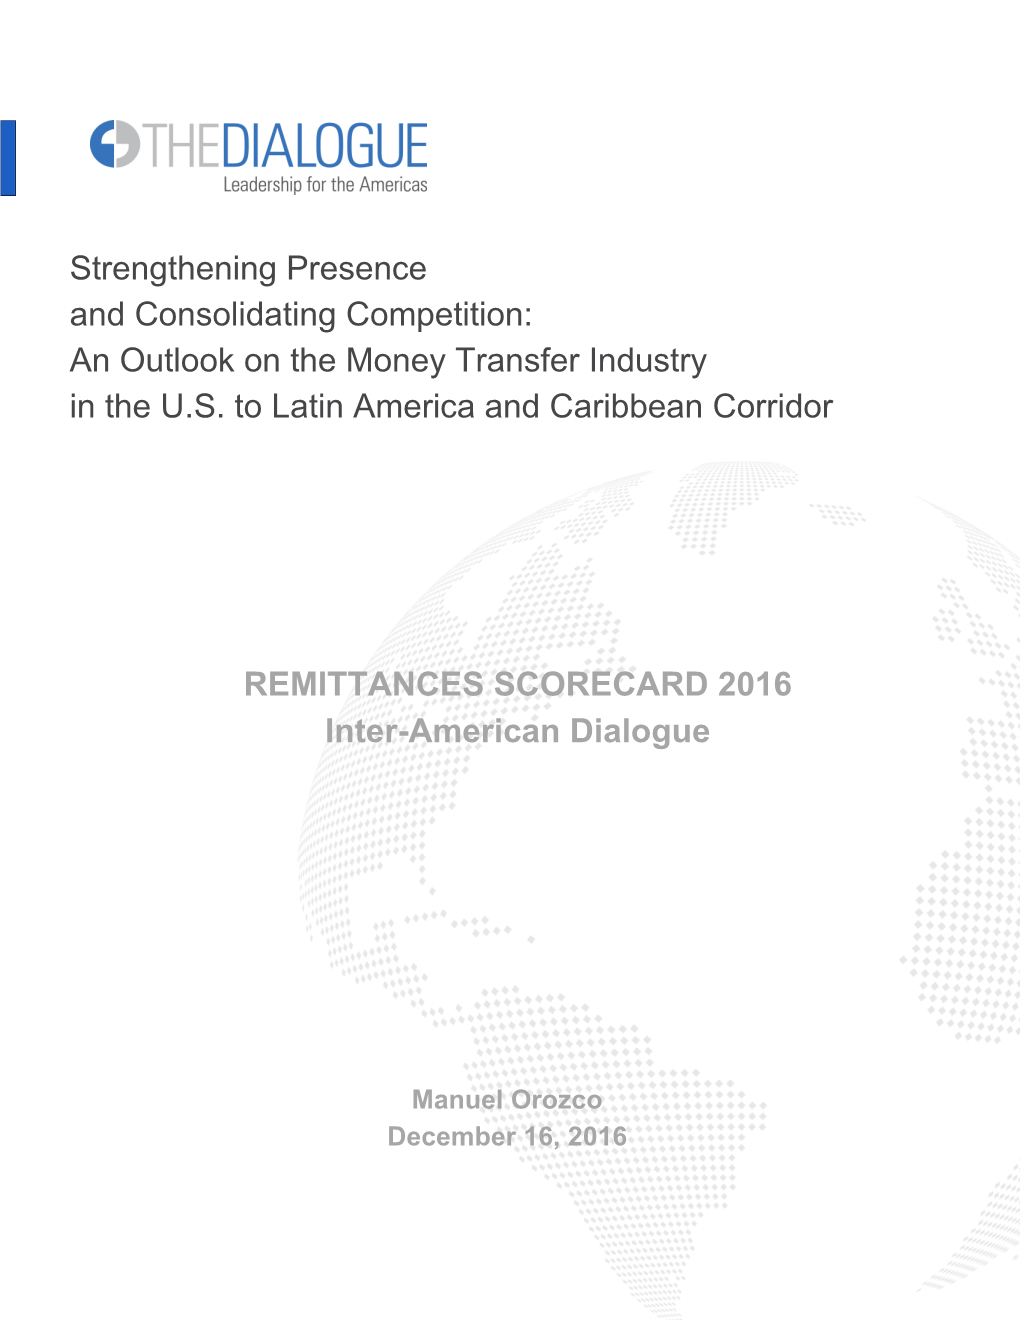 An Outlook on the Money Transfer Industry in the US to Latin America A